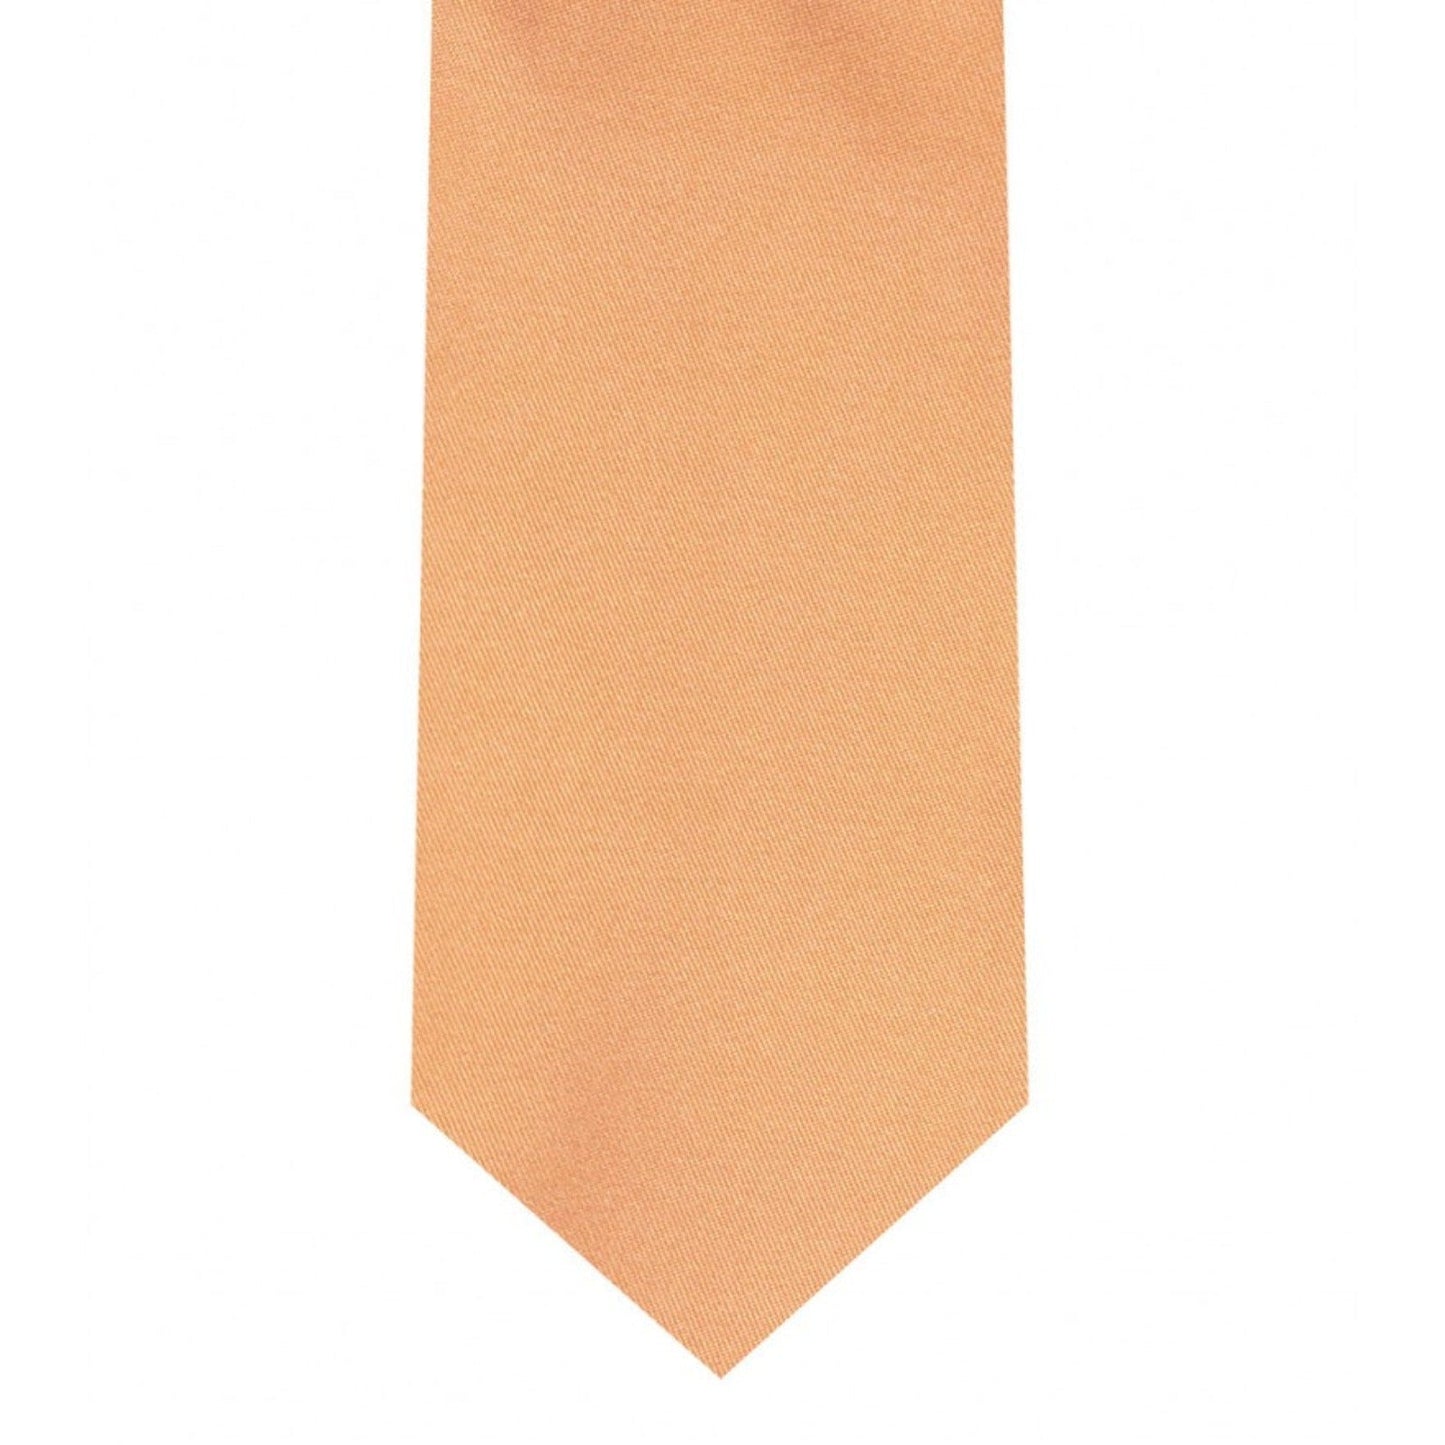 Classic Peach Tie Skinny width 2.75 inches With Matching Pocket Square | KCT Menswear